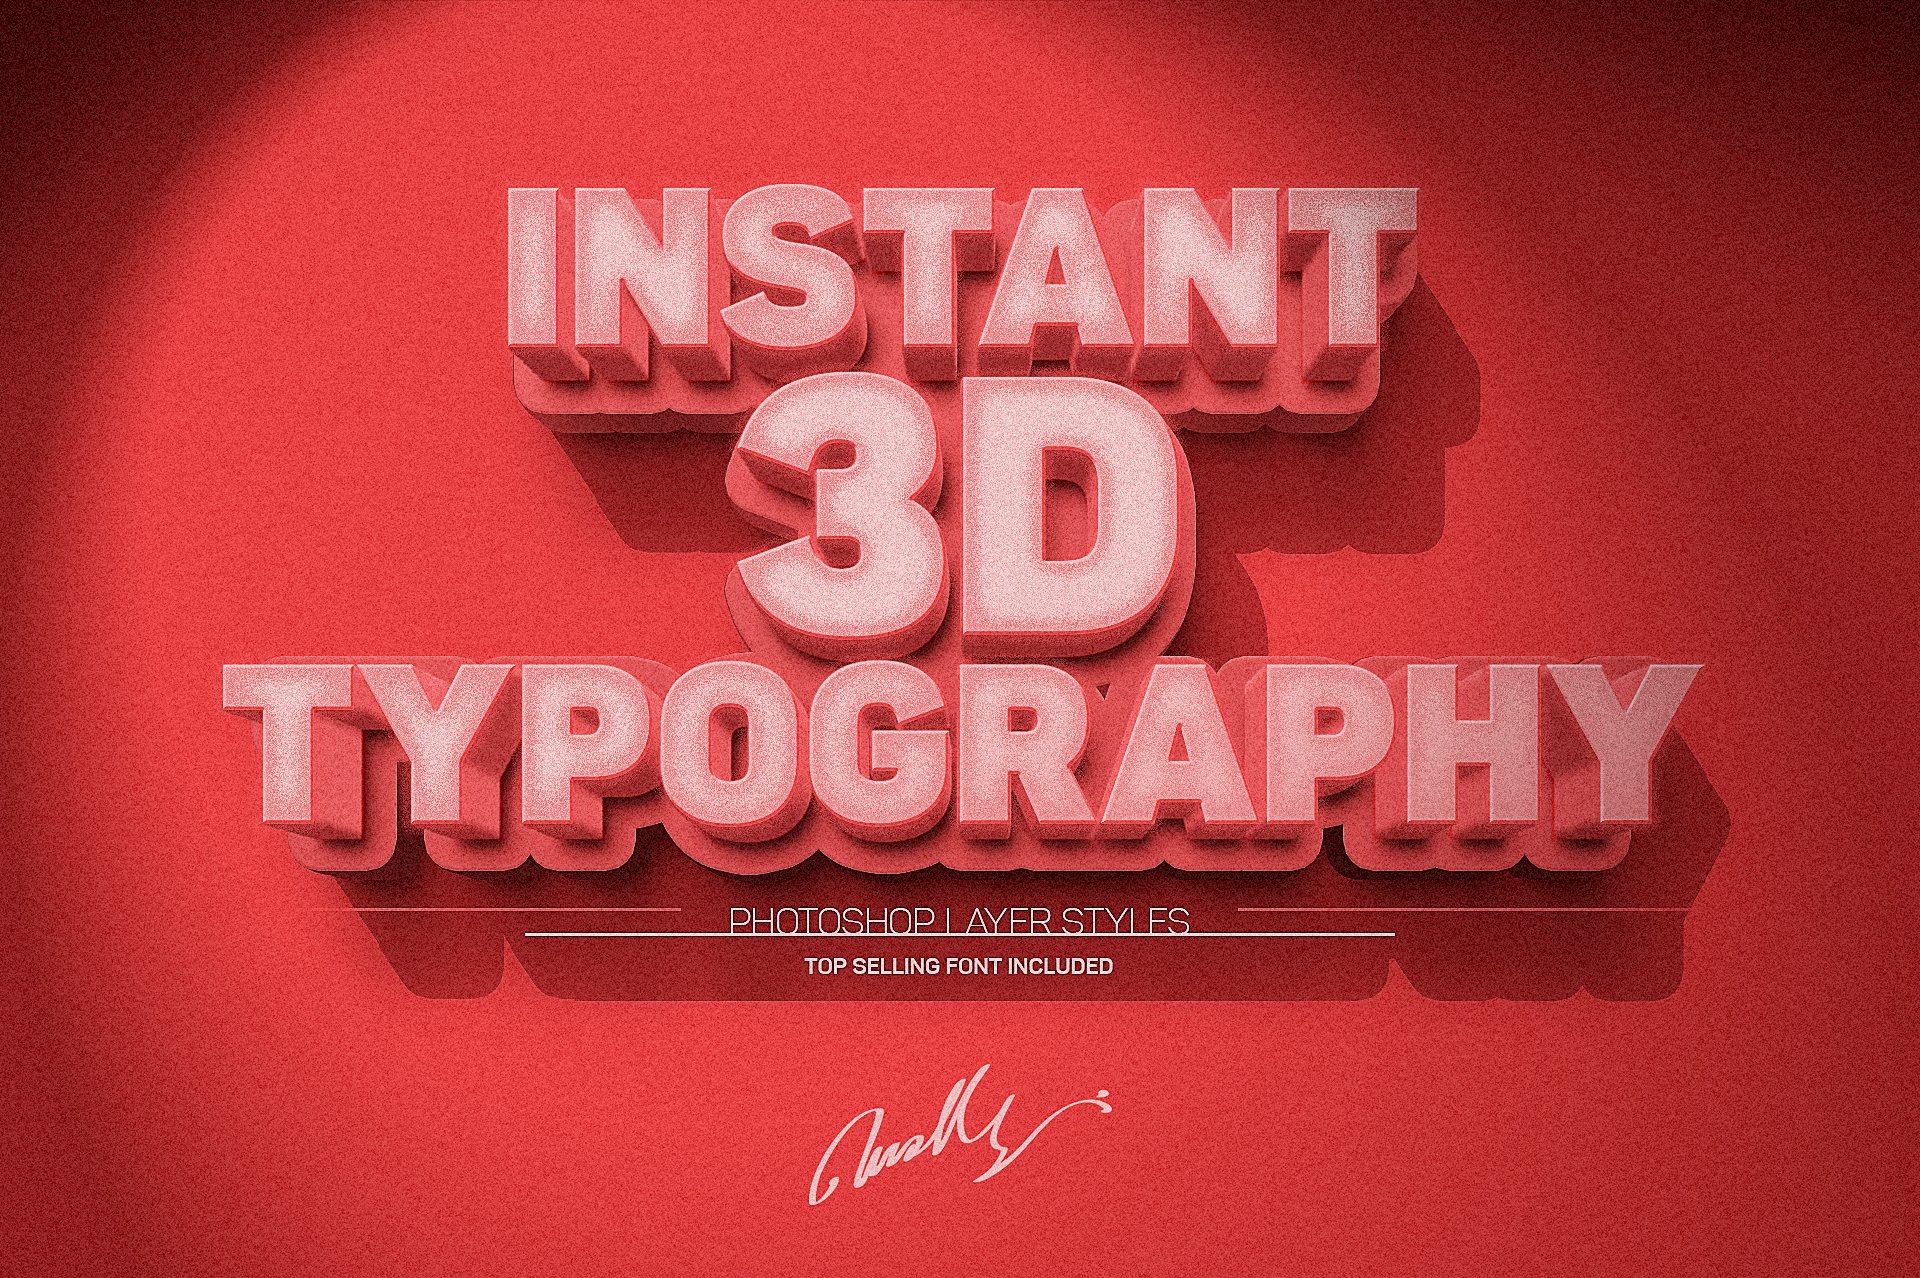 3D Text Effectcover image.